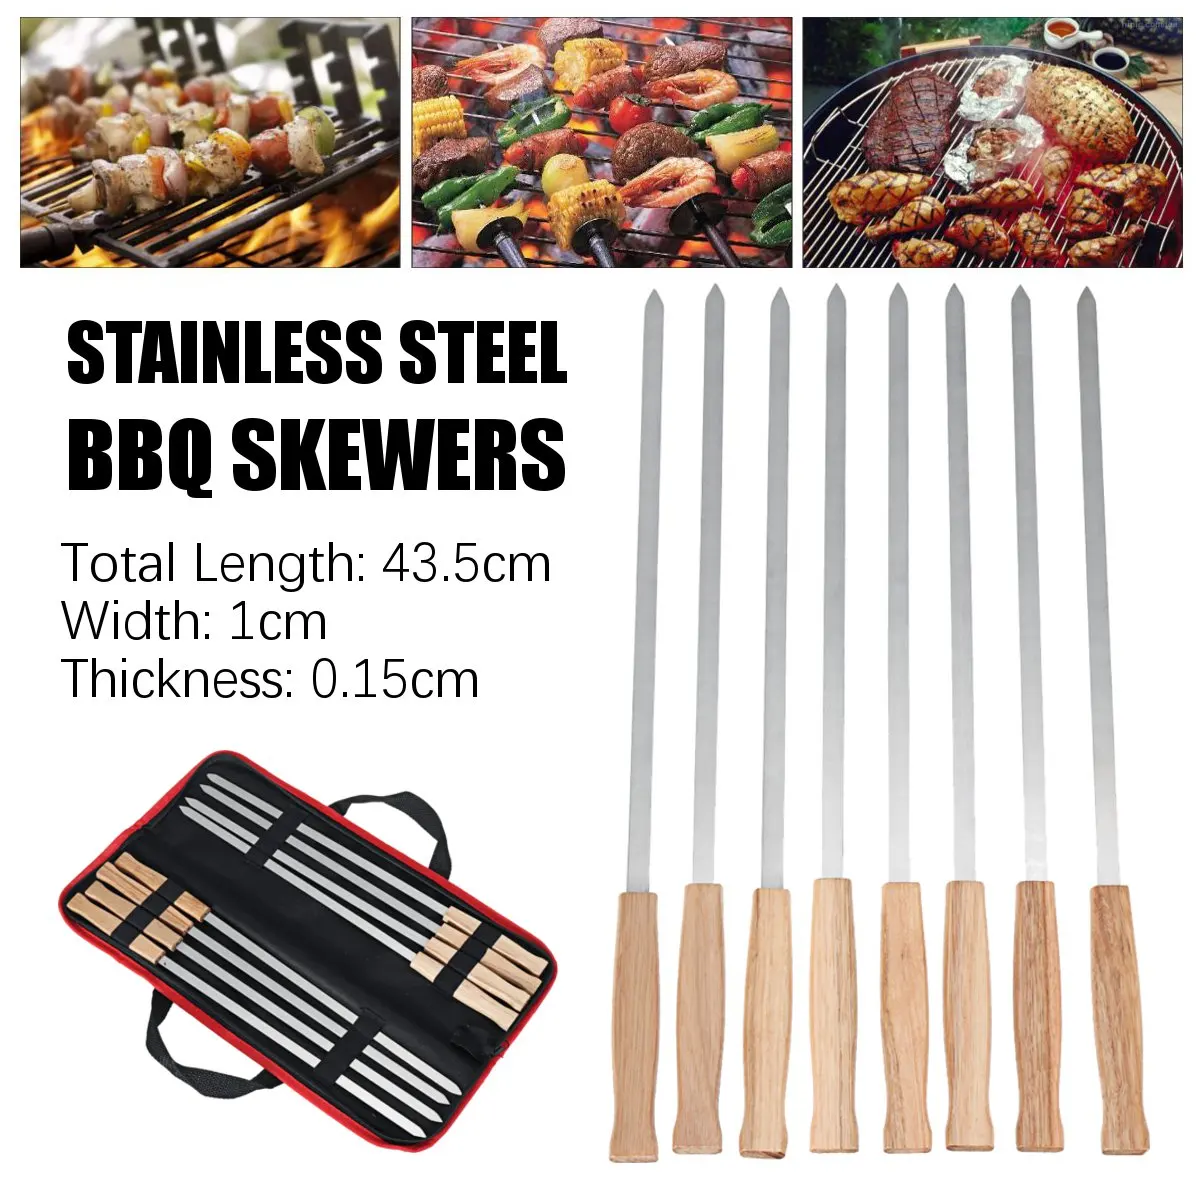 ProMaker 22 Pack Stainless Steel BBQ Barbecue Skewers Flat Metal Roasting Fork Grilling Kabob Skewers Set Reusable BBQ Sticks with Portable Storage Tube For Home Outdoor Barbeque BBQ Skewers 